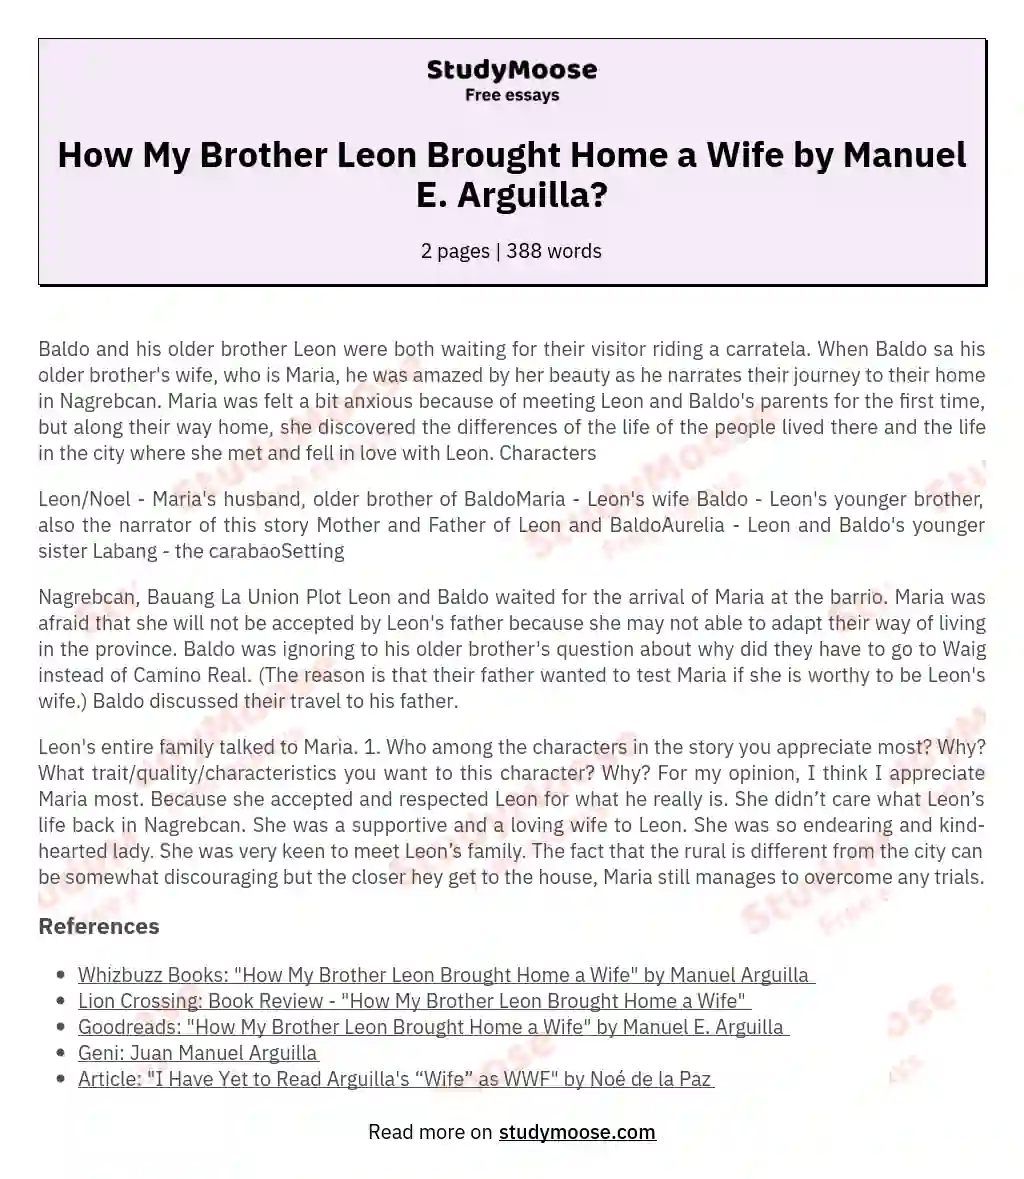 How My Brother Leon Brought Home a Wife by Manuel E. Arguilla? essay